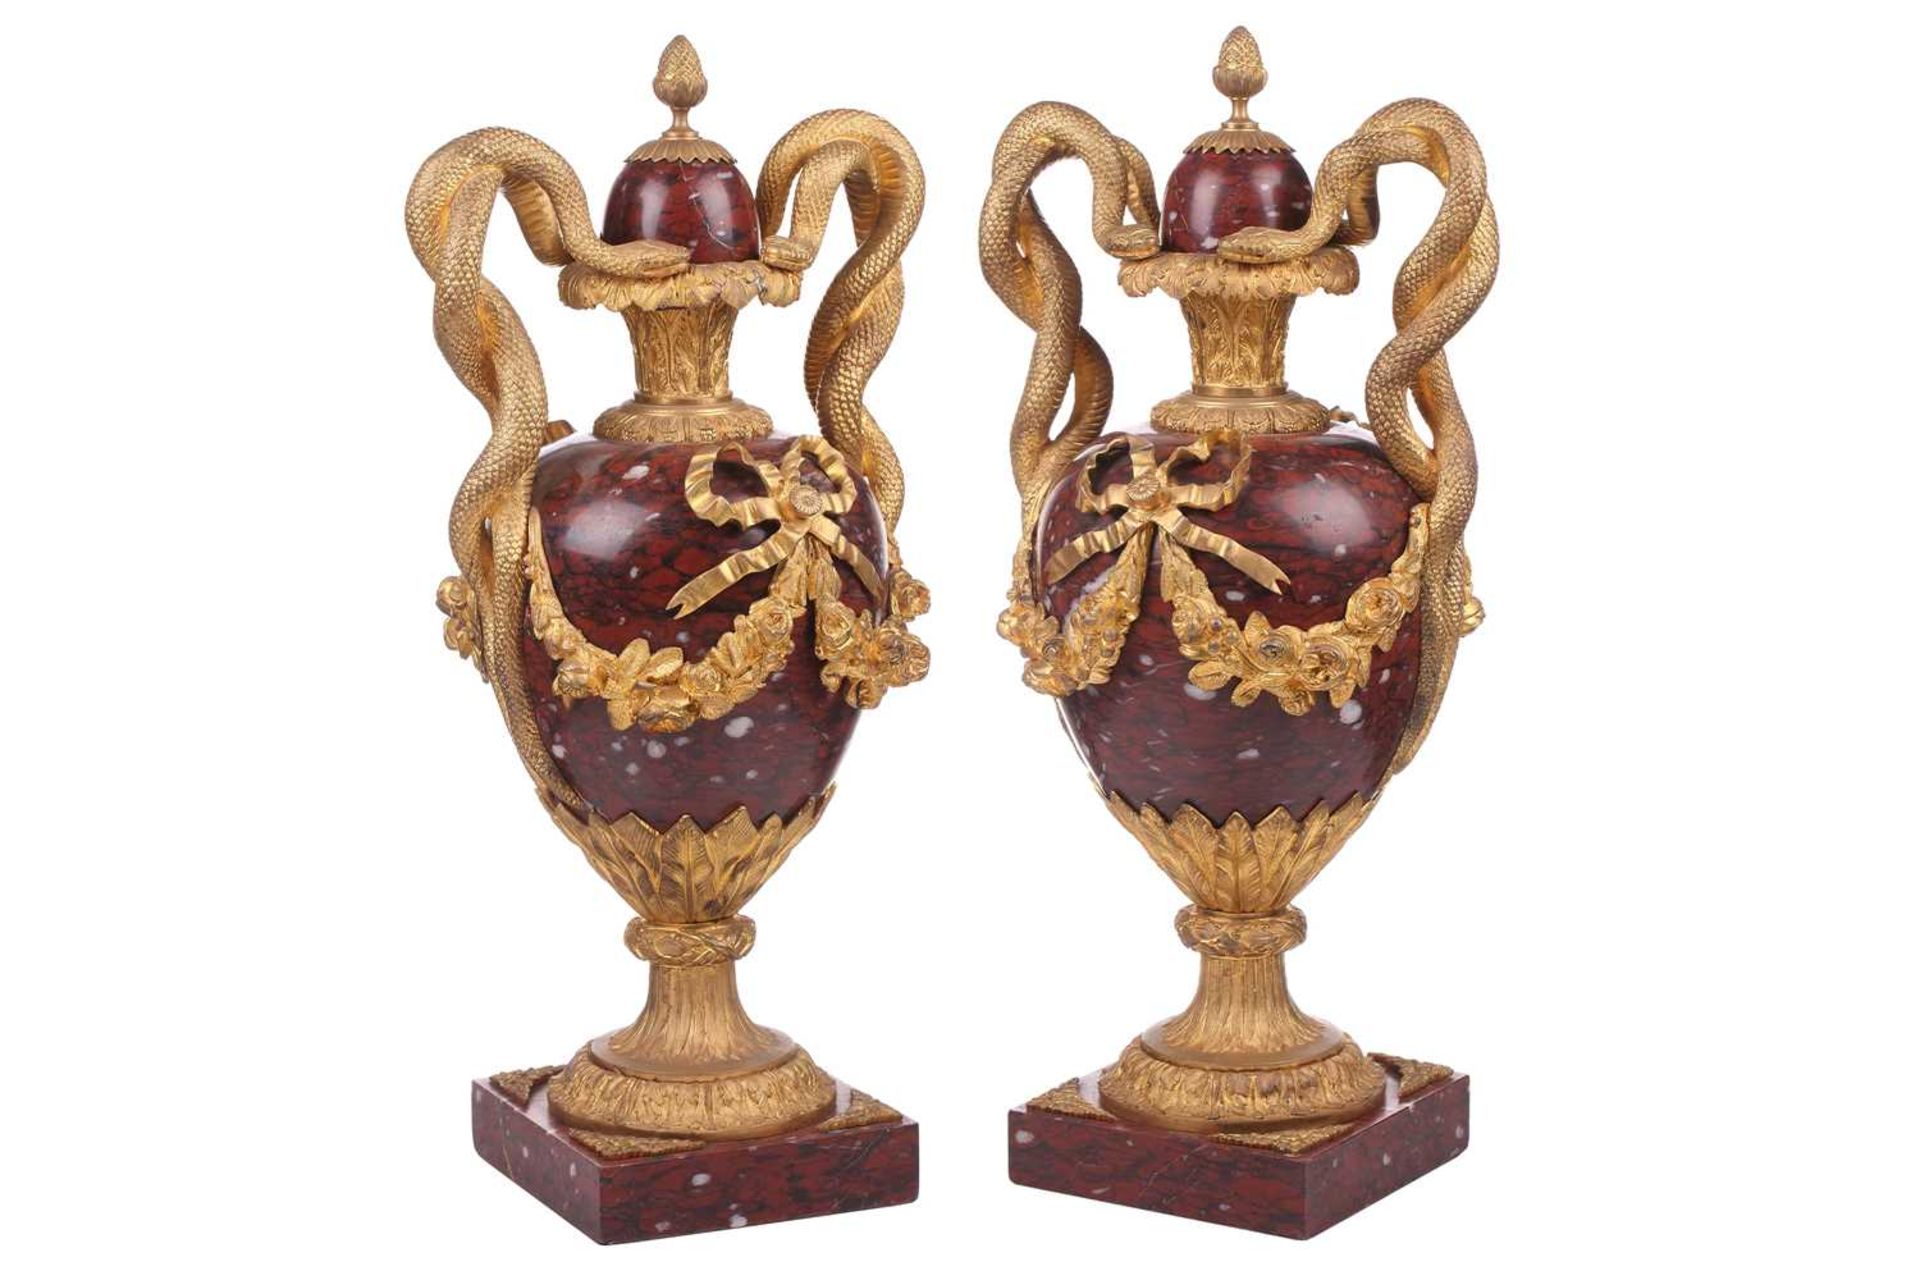 A pair of fine large Napoleon III rouge marble and ormolu serpent-handled urns and covers, each body